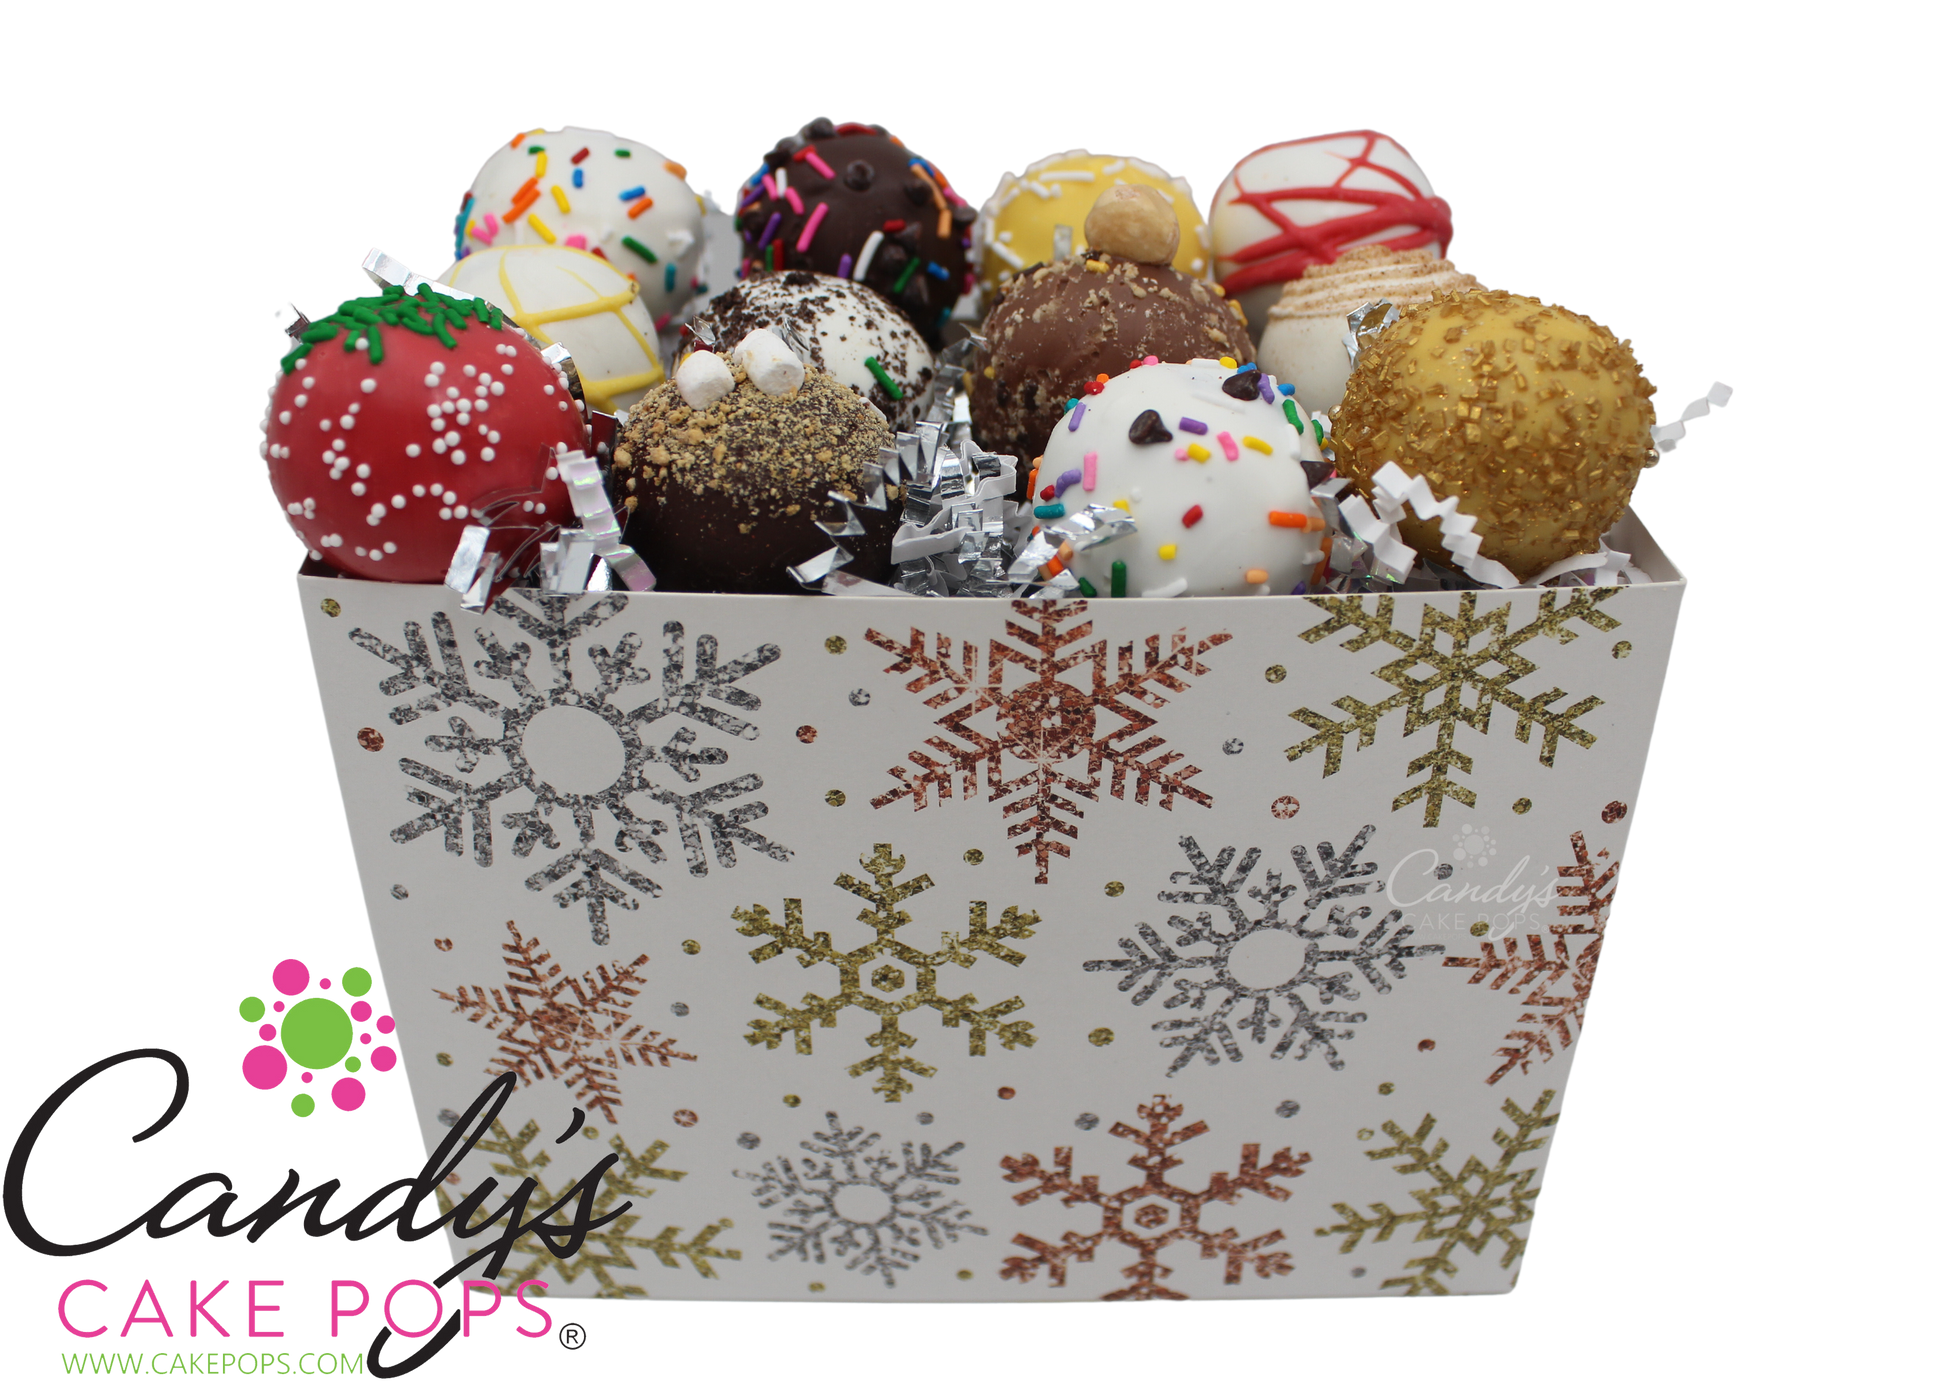 Cakesicle Treat Boxes, Clear Dessert Gift Box for Cake Pop Favors